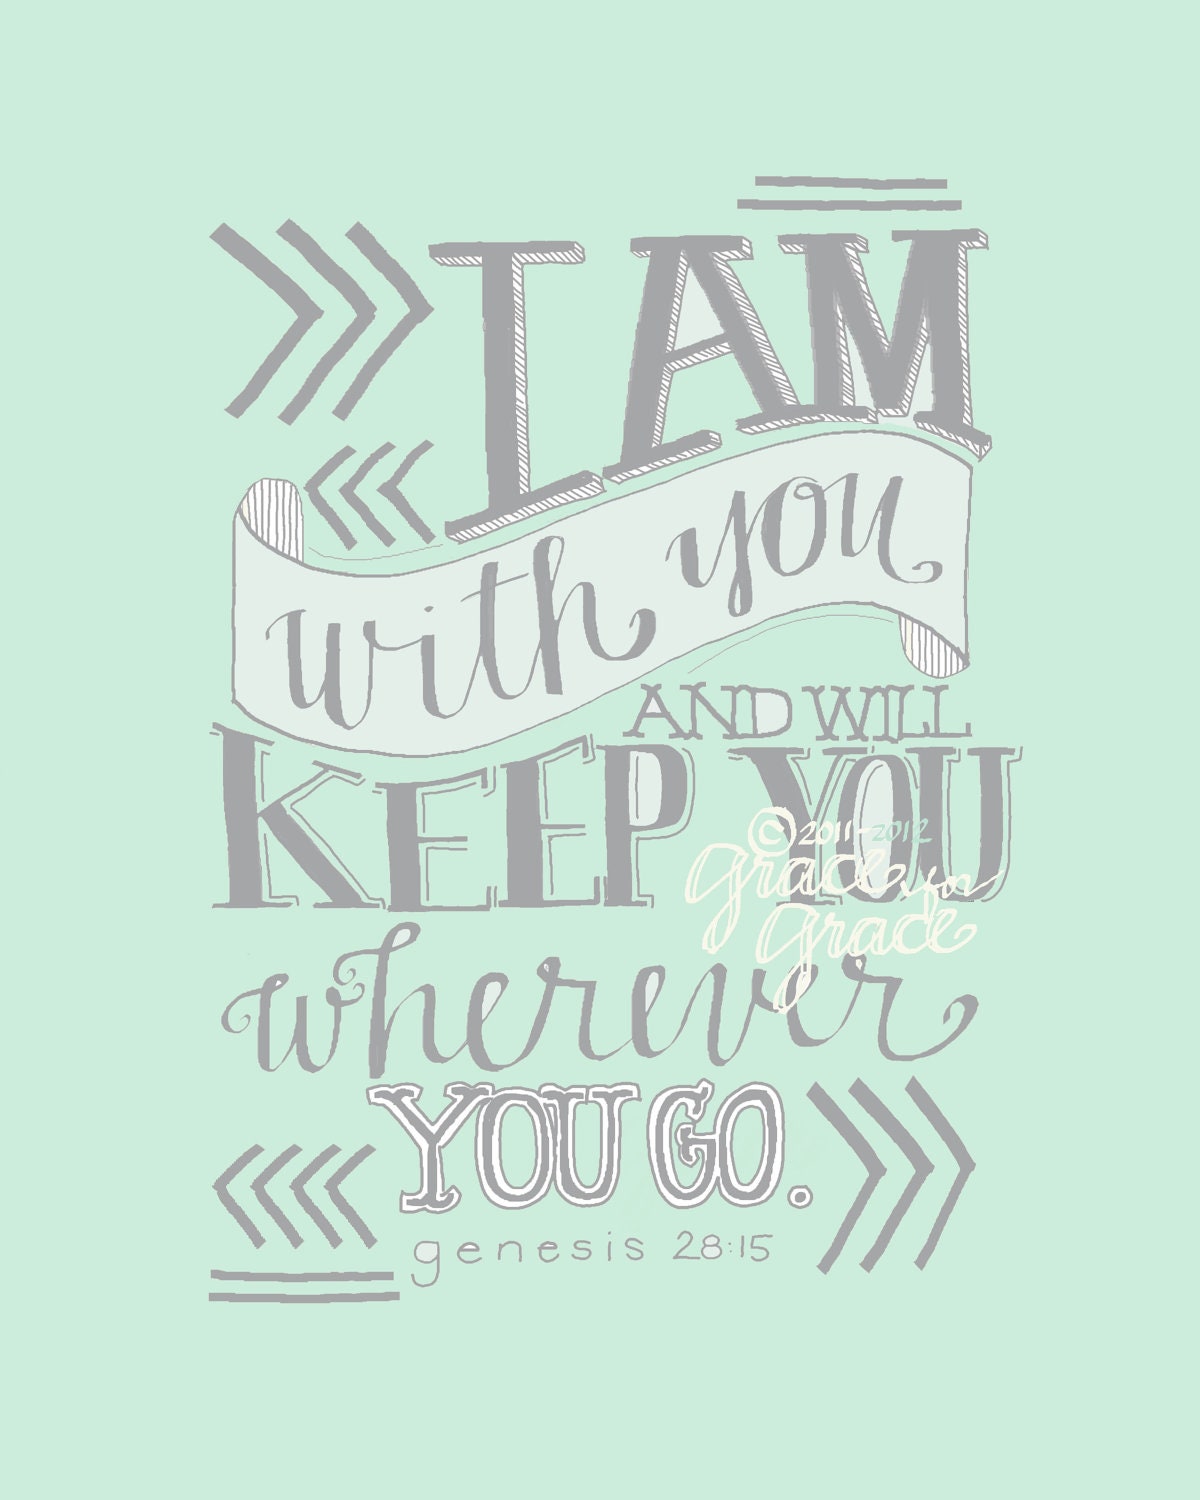 Christian Art - I Am With You and Will Keep You - 8x10 Giclee Print - Scripture Art, Mint , Hand Typography, Encouragement